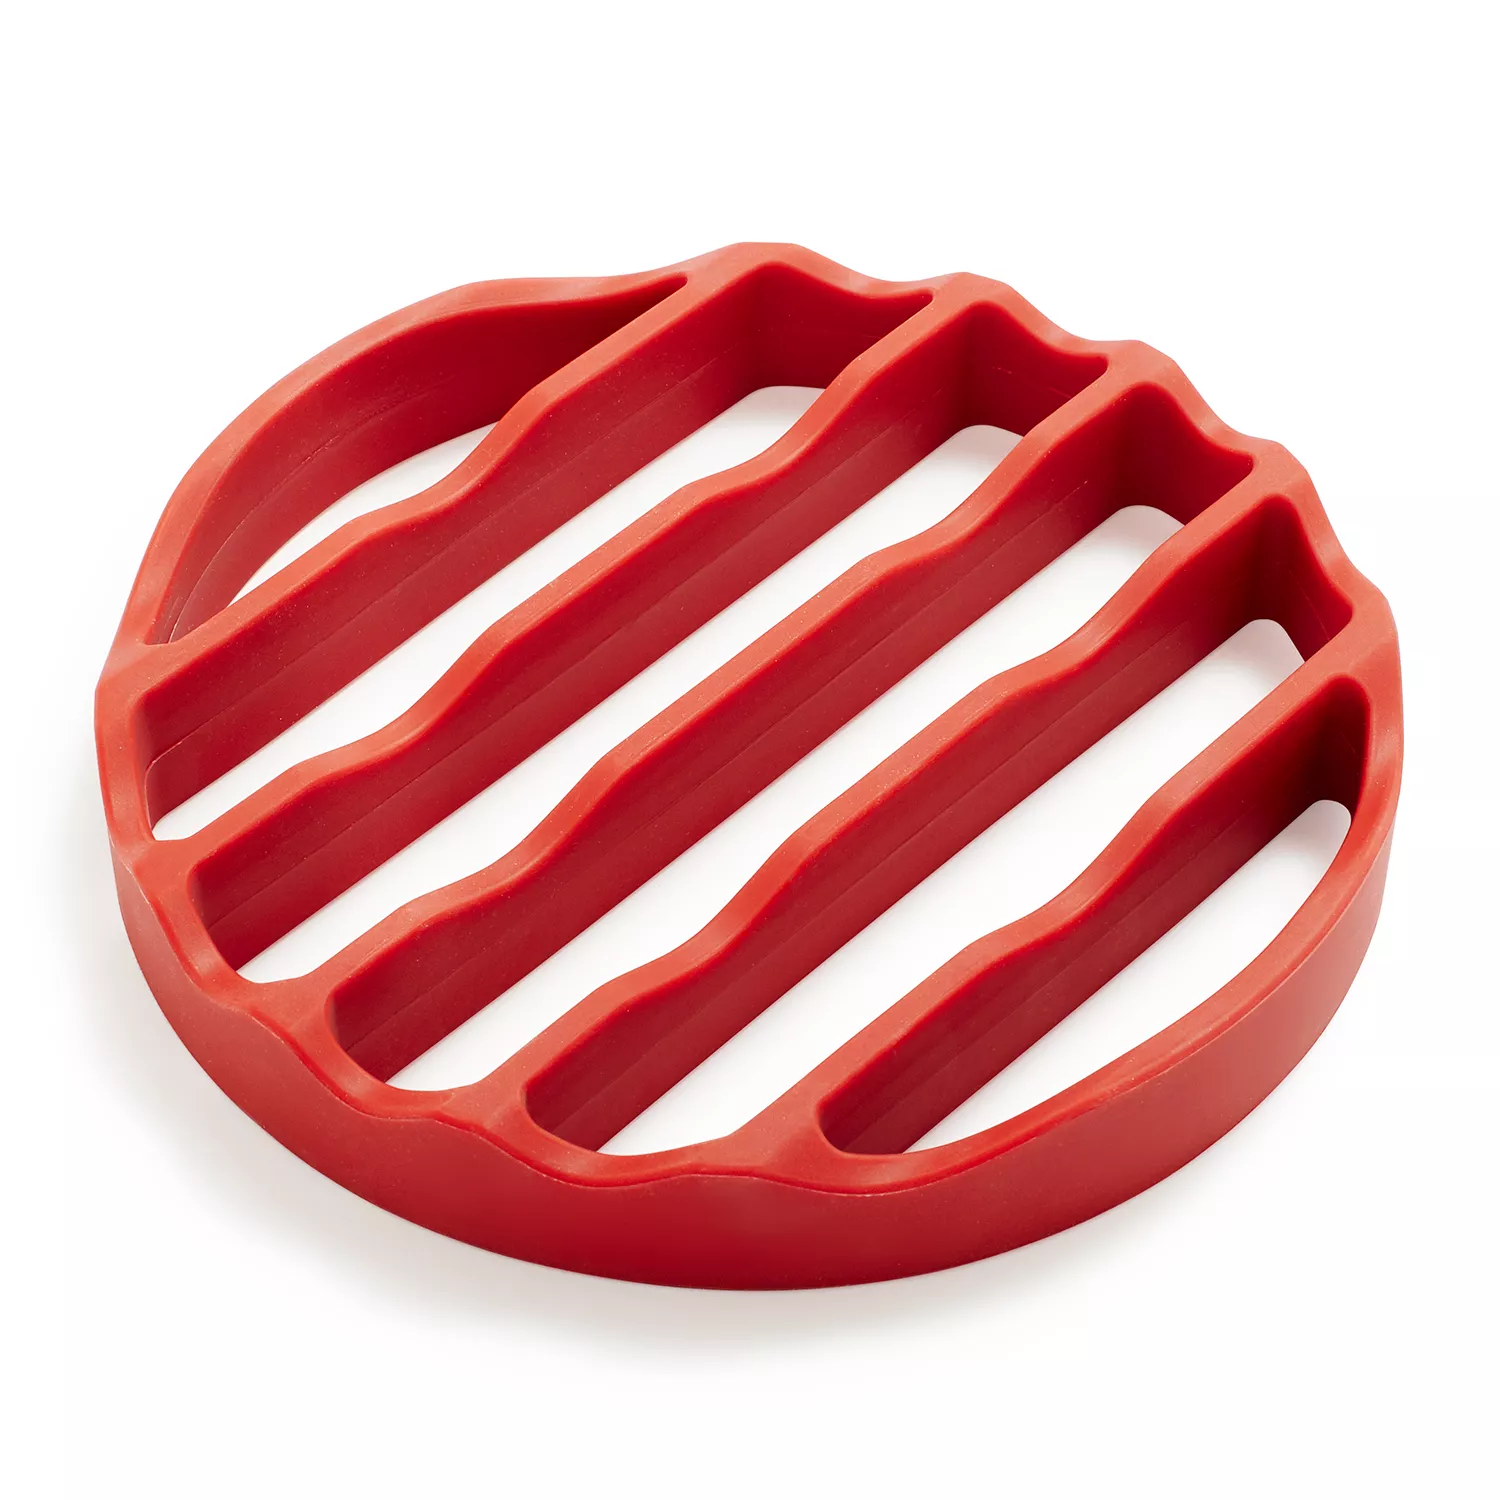 OXO Good Grips Silicone Pot Holder - The Kitchen Table, Quality